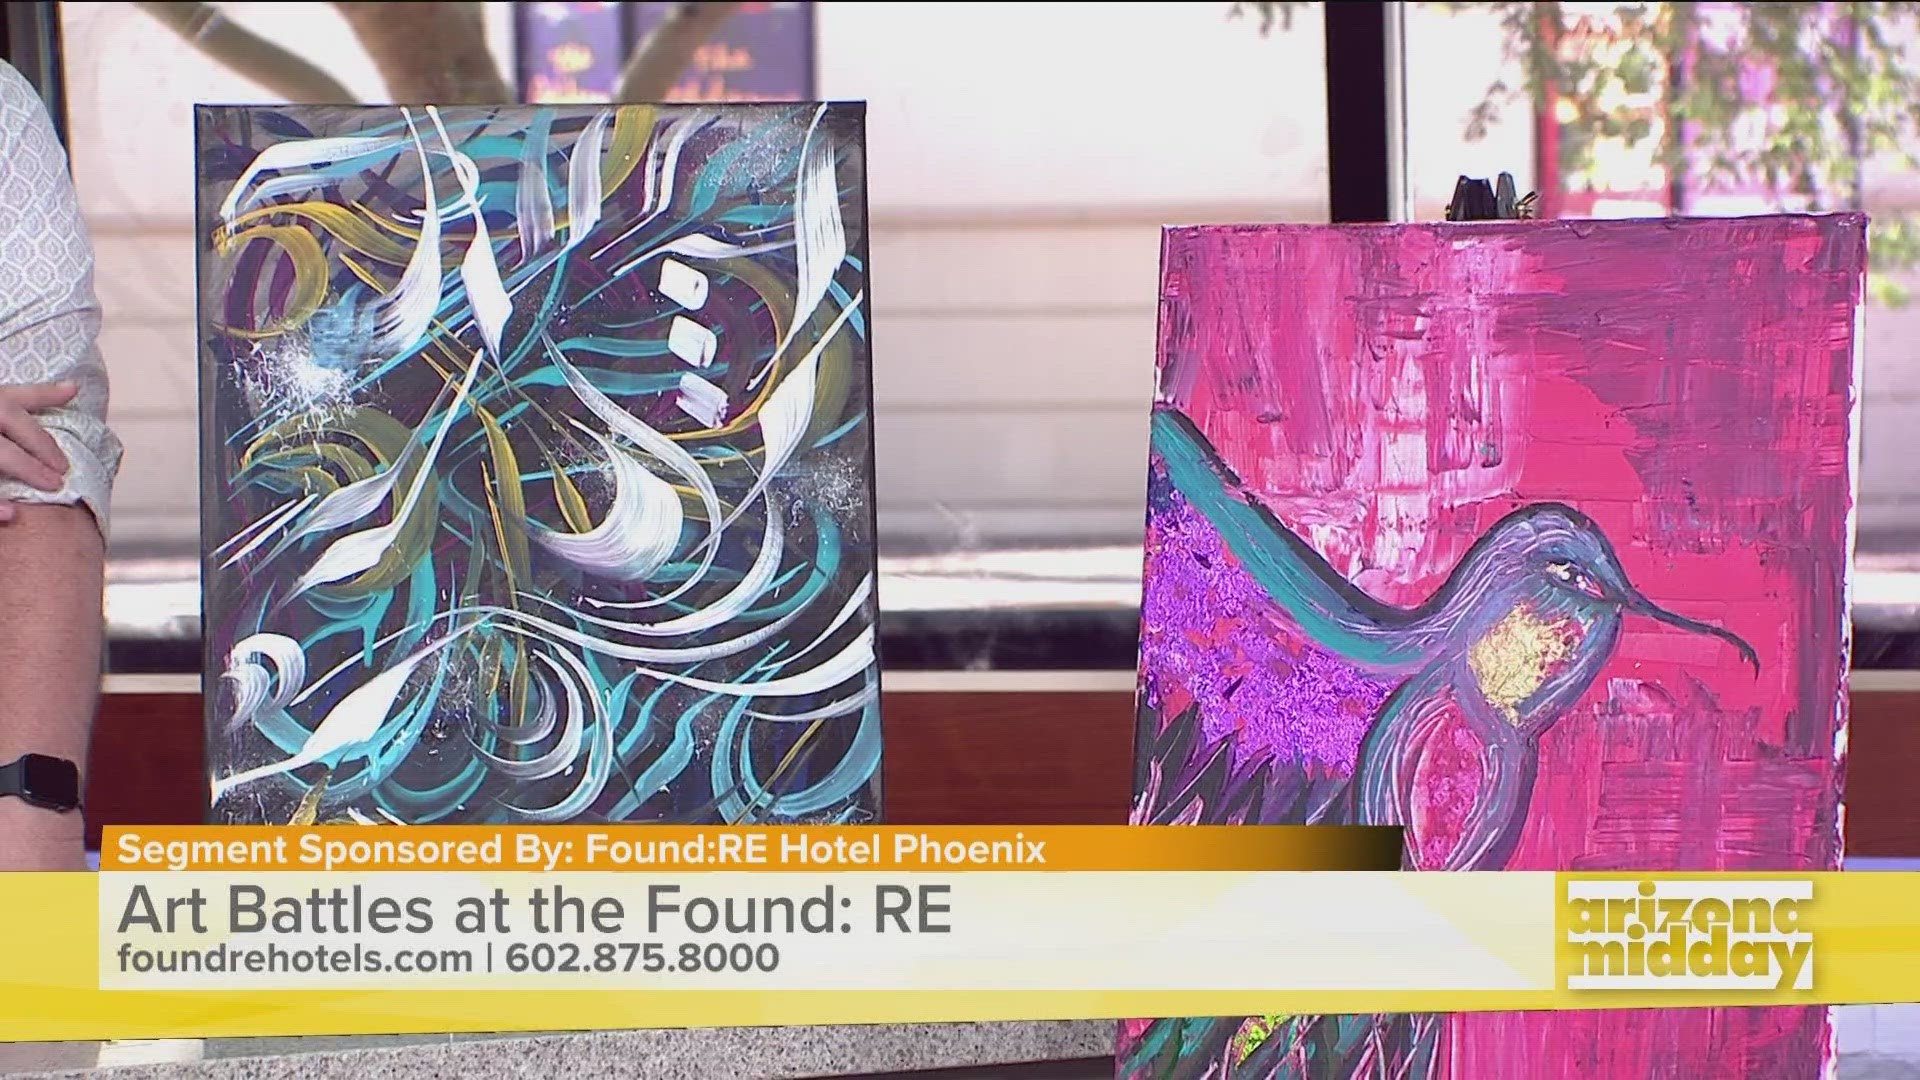 Jordan and Destry gives us a sneak peek of what will happen during the three-round painting competition at FOUND:RE Hotel where artists will compete for a title.